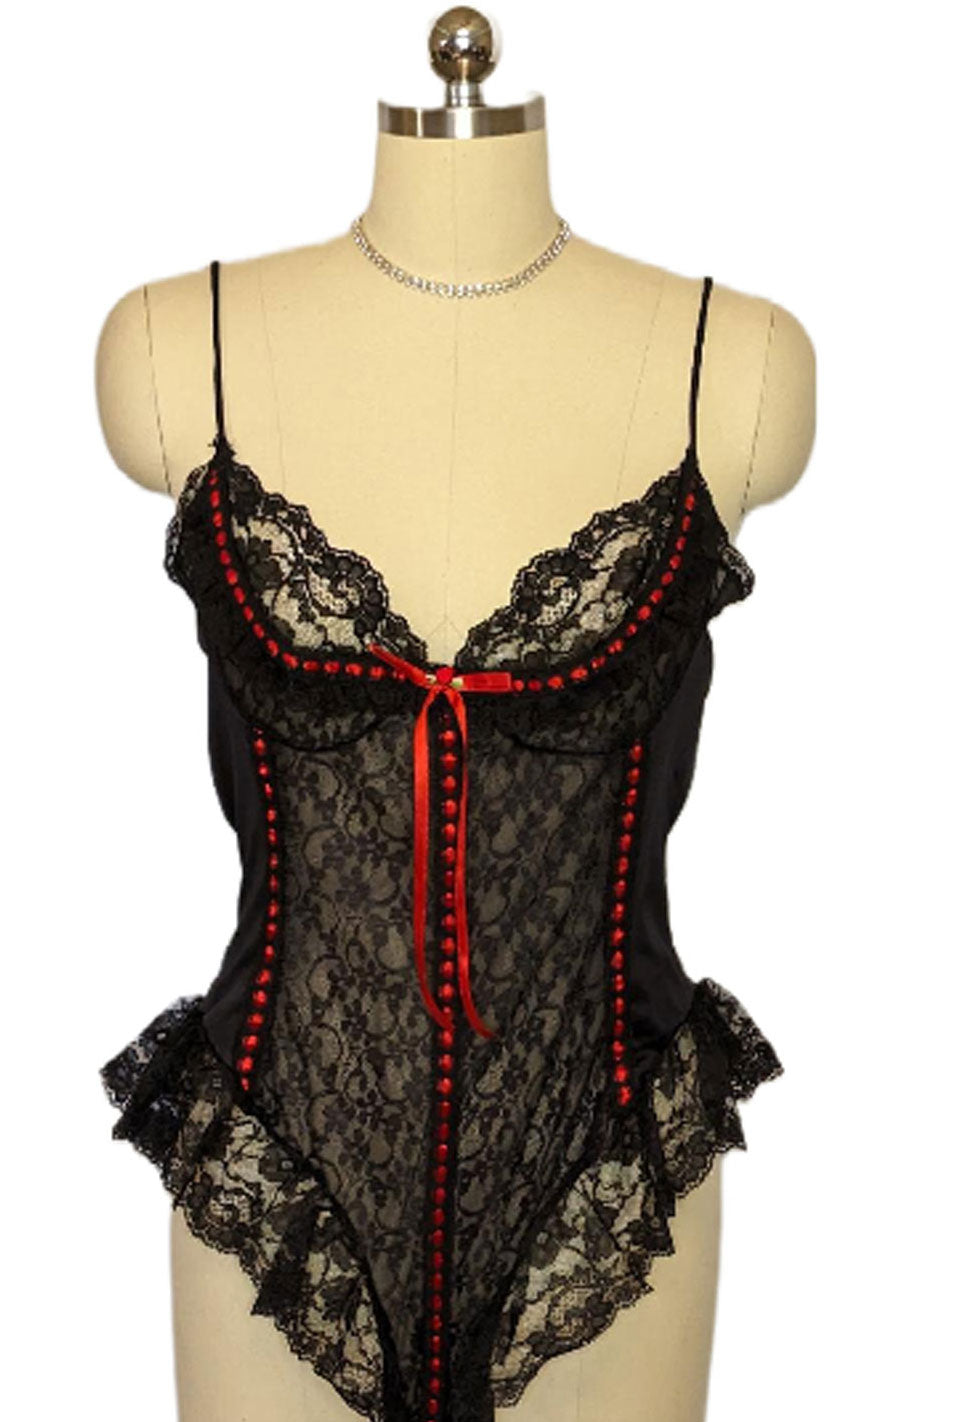 GORGEOUS VINTAGE SIZE LARGE BLACK LACE AND RED SATIN RIBBON TEDDIE